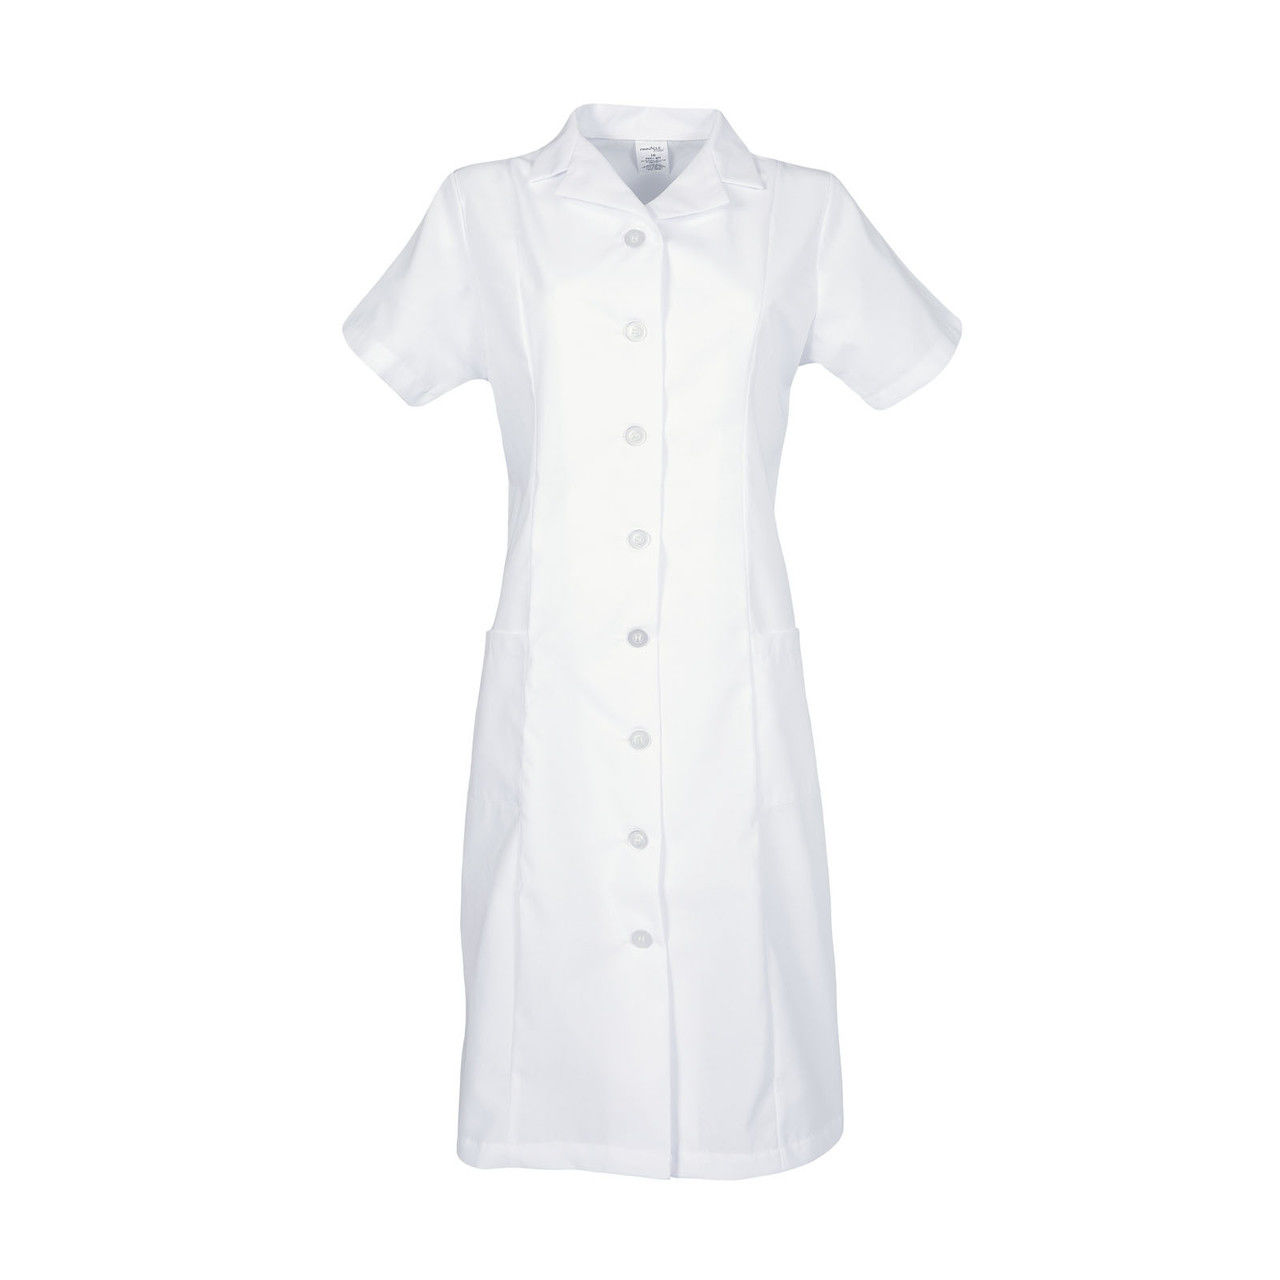 Where are the pockets located on the white uniform dress?